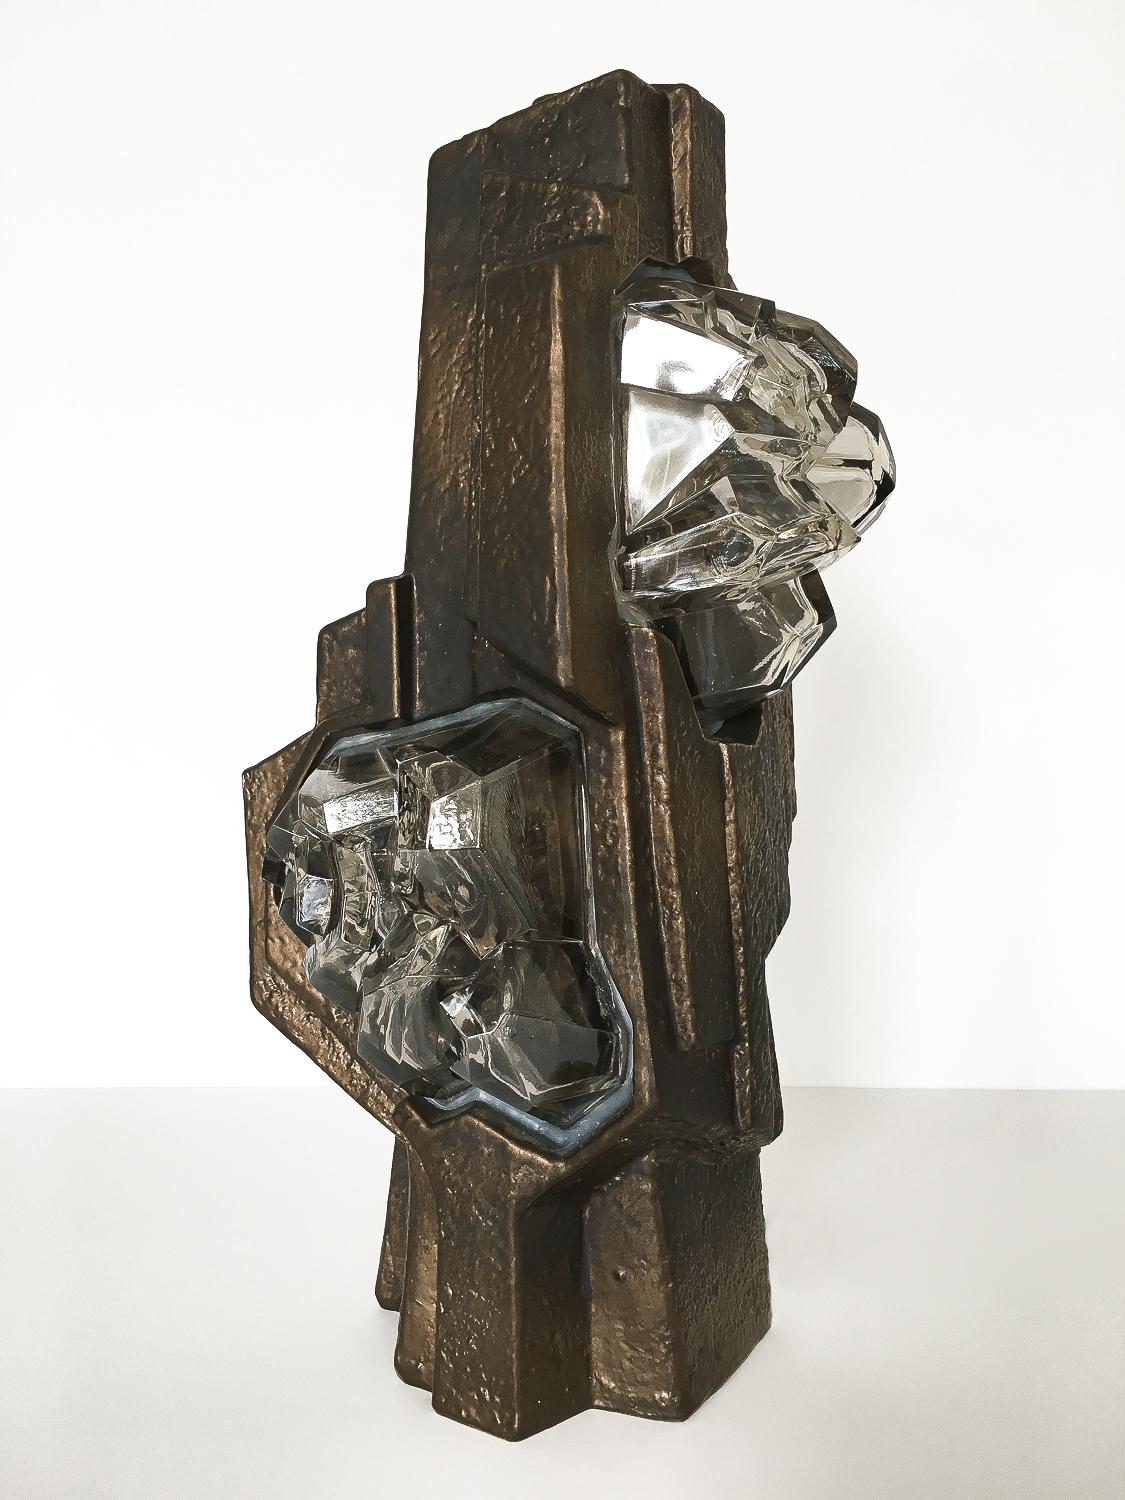 Unique and unusual sculptural rock and crystal formation table lamp in glazed ceramic and glass. Brutalist in form, this table lamp features a dark bronze glazed ceramic body with two thick faceted clear glass windows. The glass is intended to